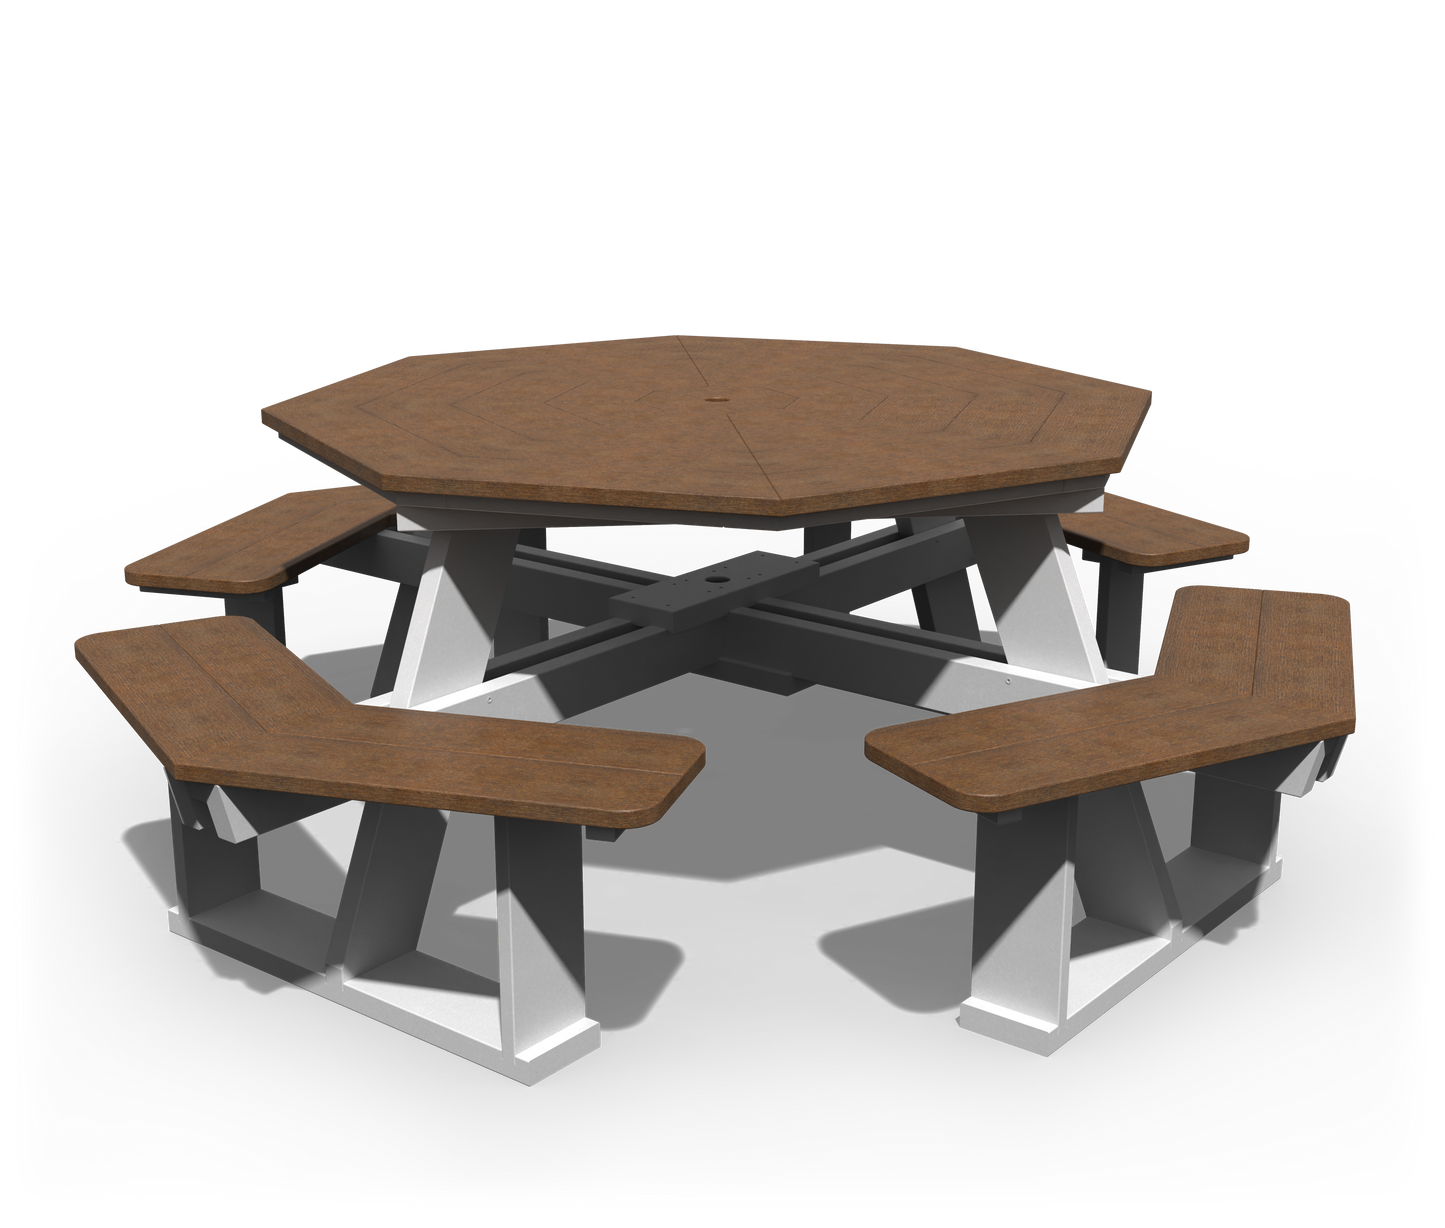 Patiova Recycled Plastic 5' Octagon Picnic Table with Seats Attached - LEAD TIME TO SHIP 3 WEEKS